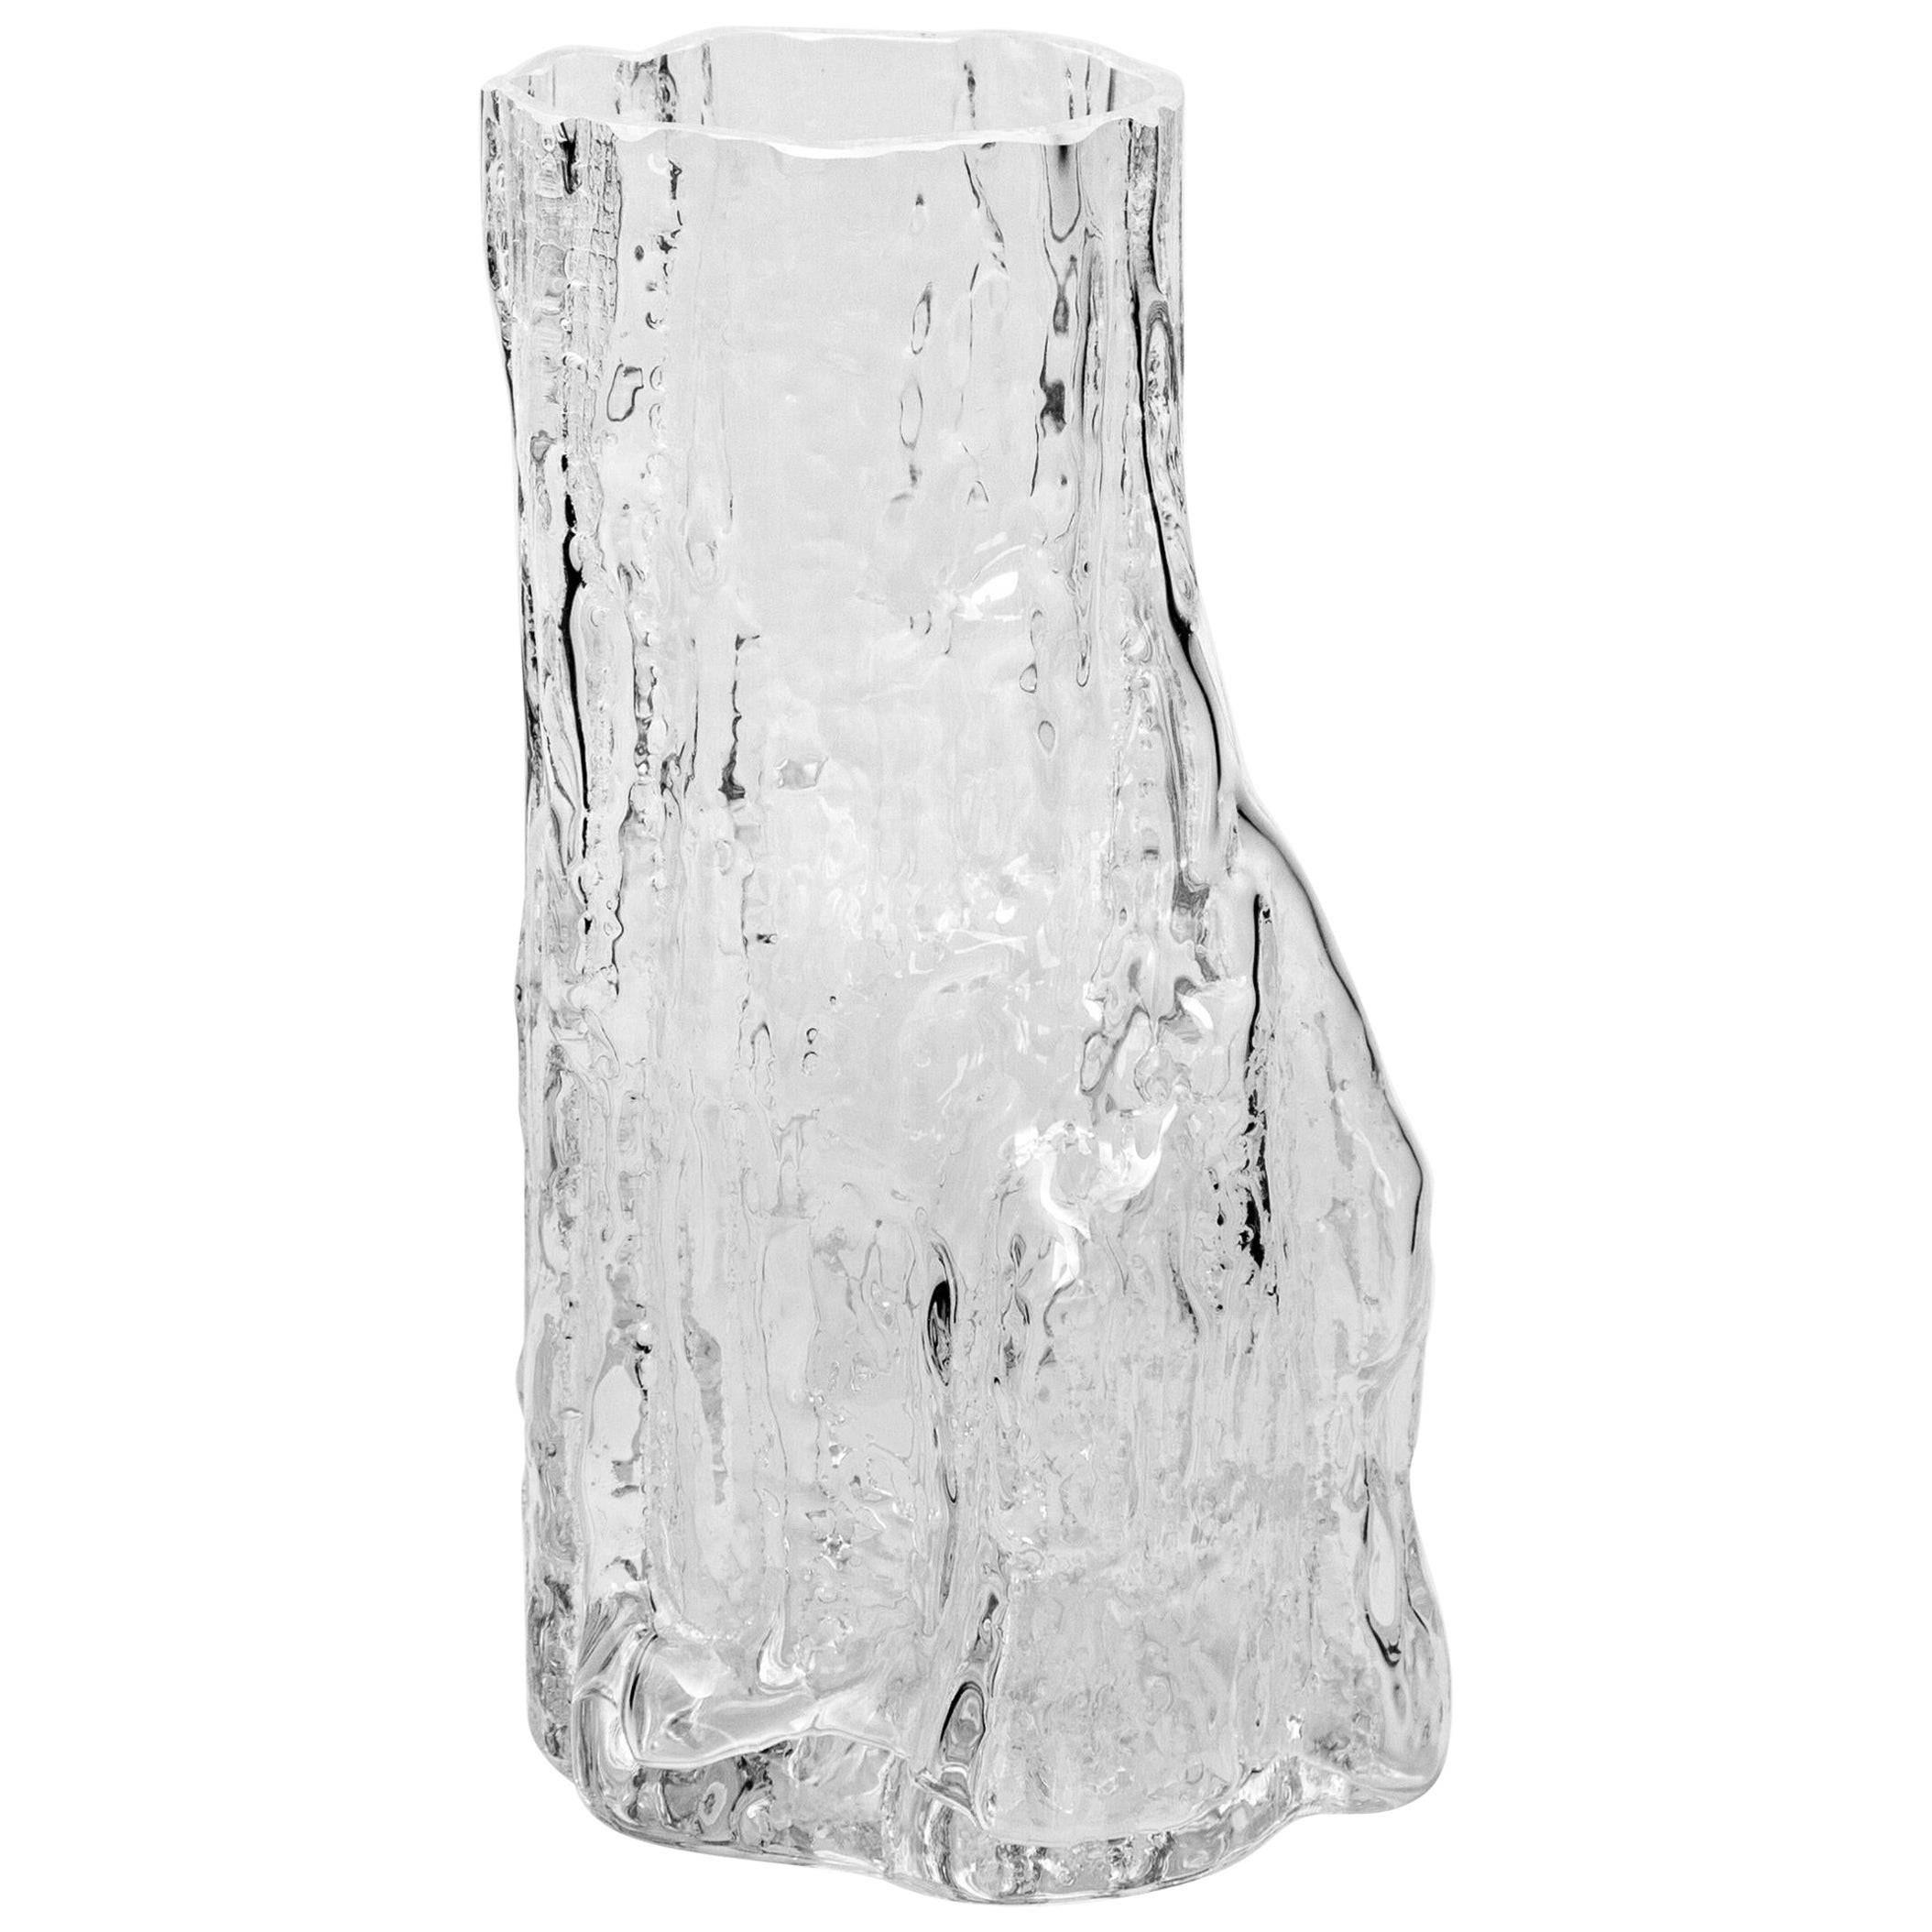 Cerne Vase Clear by Samuel Reis for Vicara, Contemporary Blown Glass